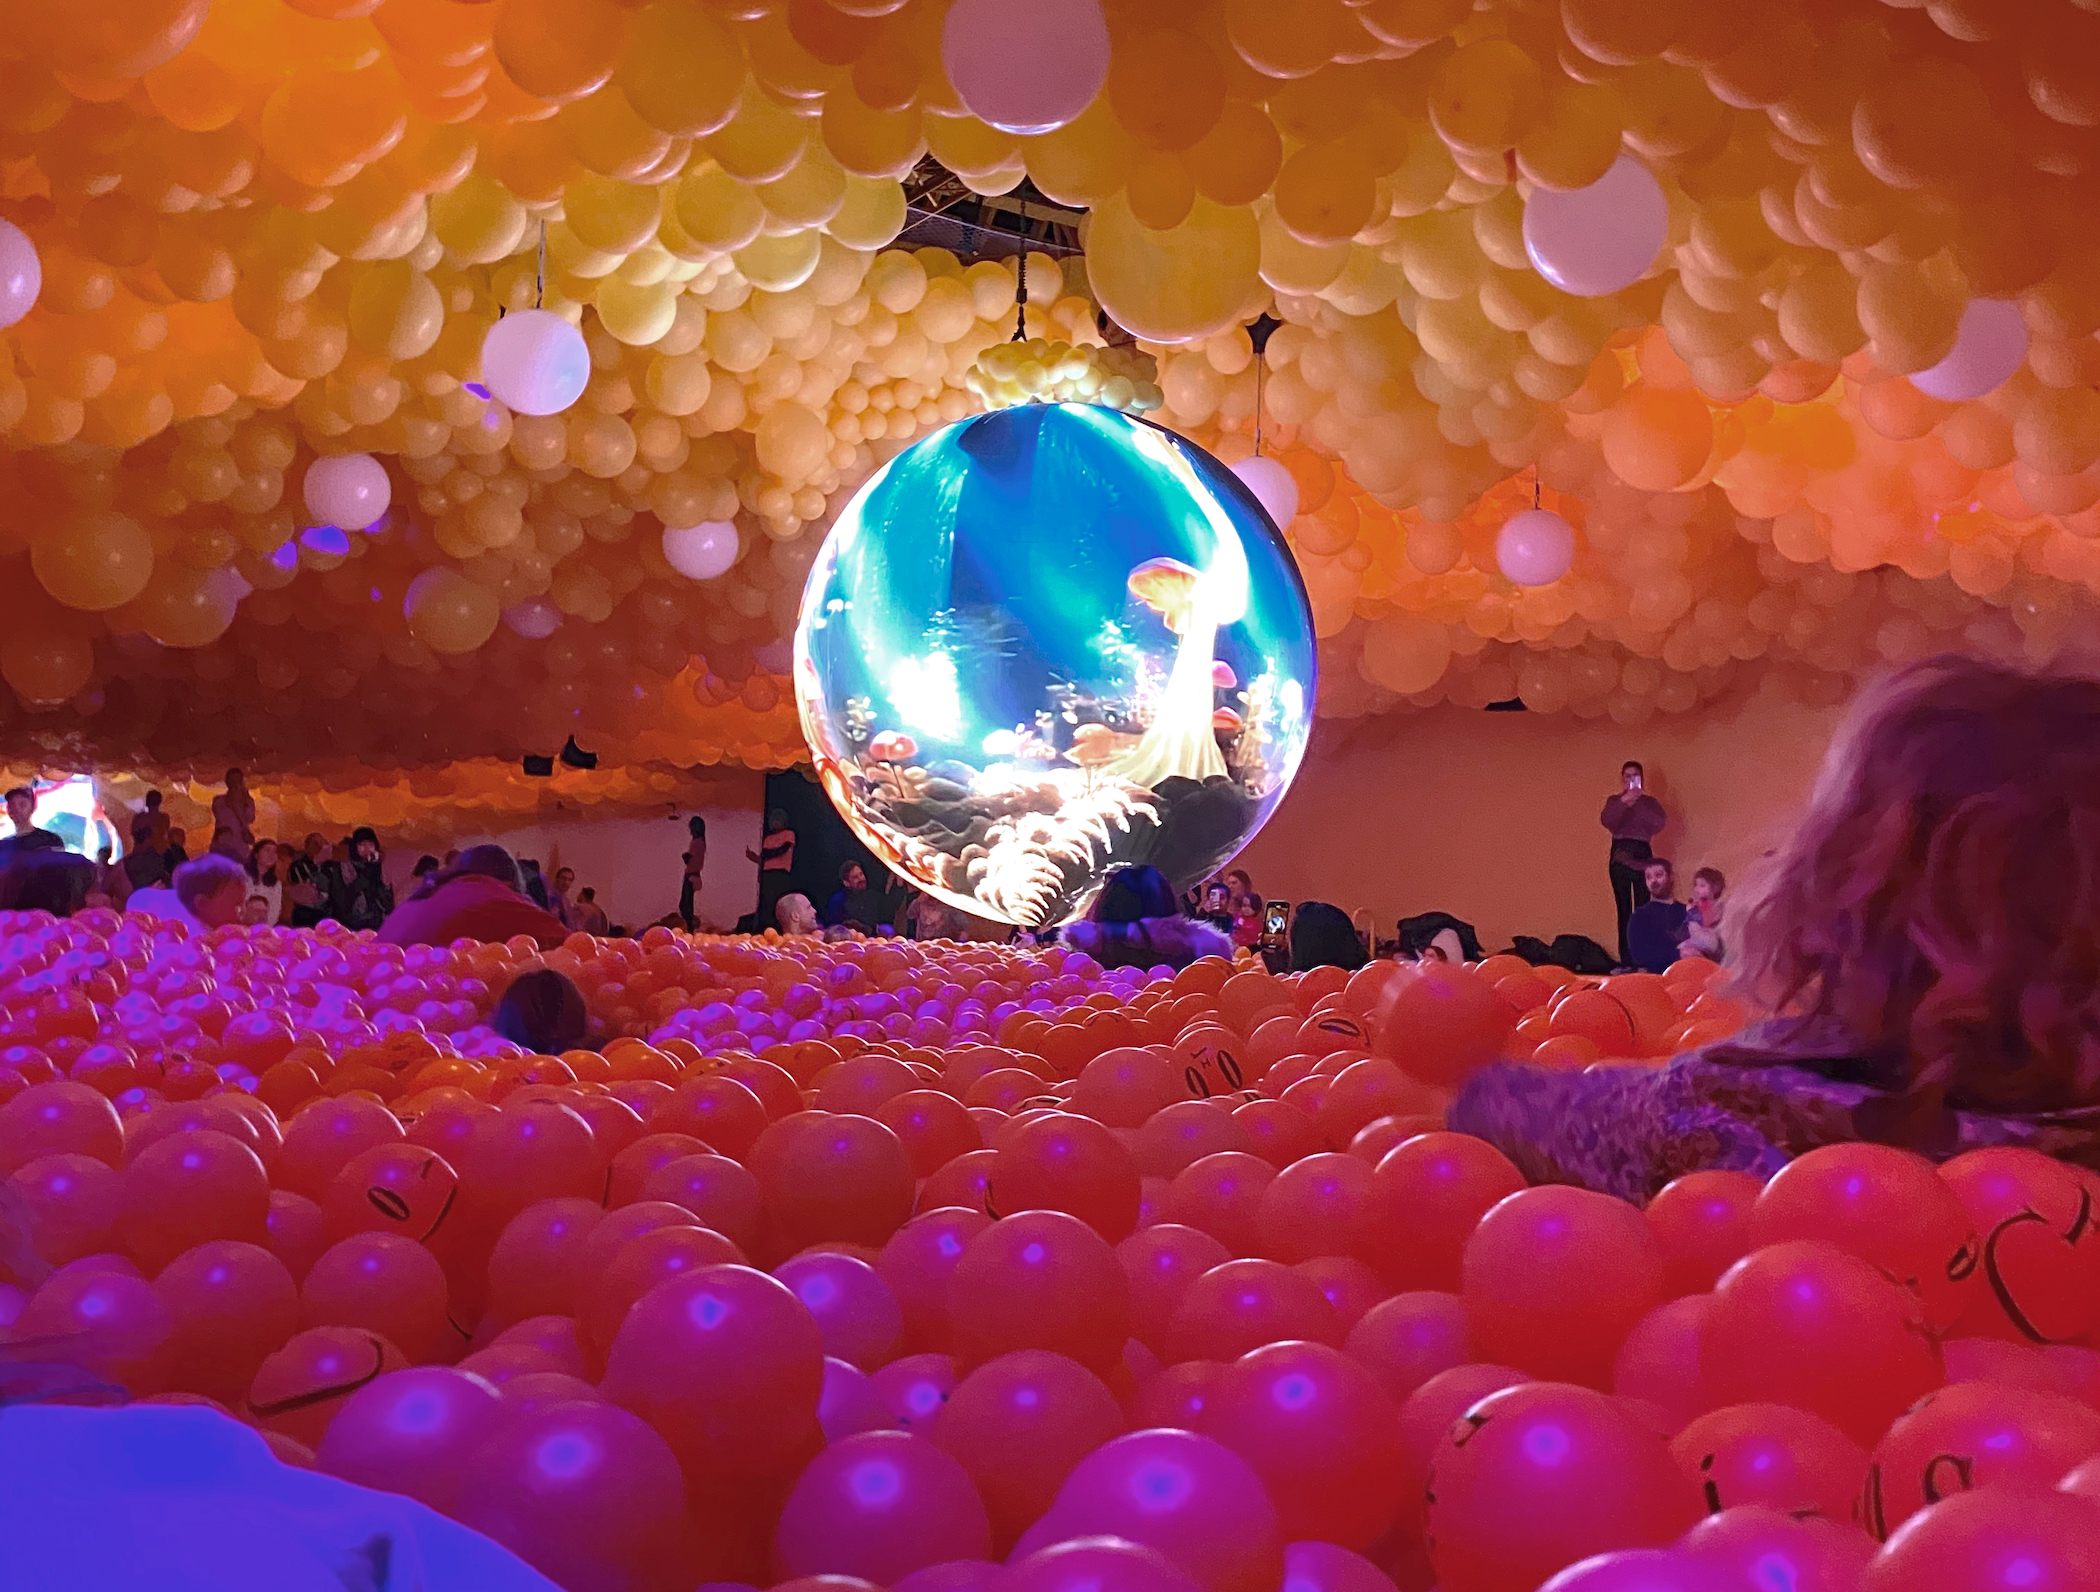 Family Experience Of The Month: The Balloon Museum In London